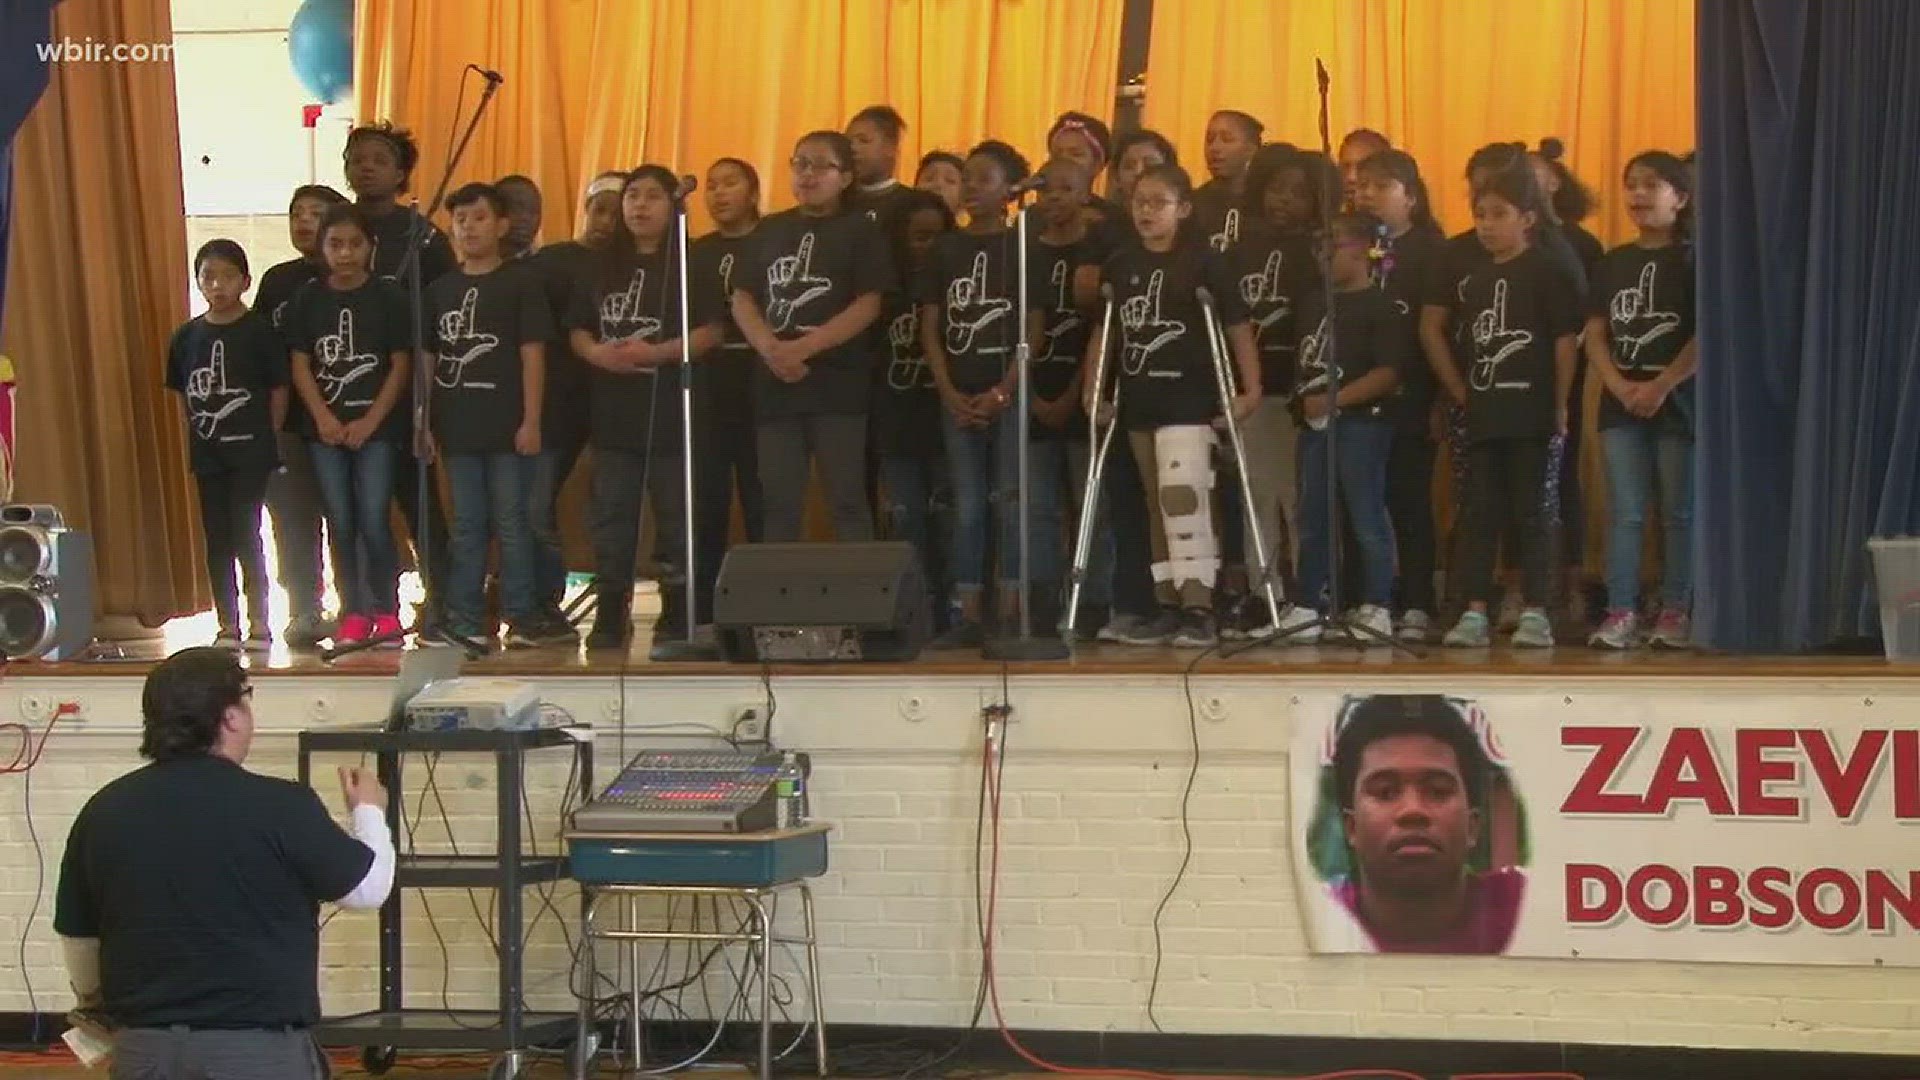 Jan. 24, 2018: Lonsdale Elementary School hosted its second annual Zaevion Dobson Day.